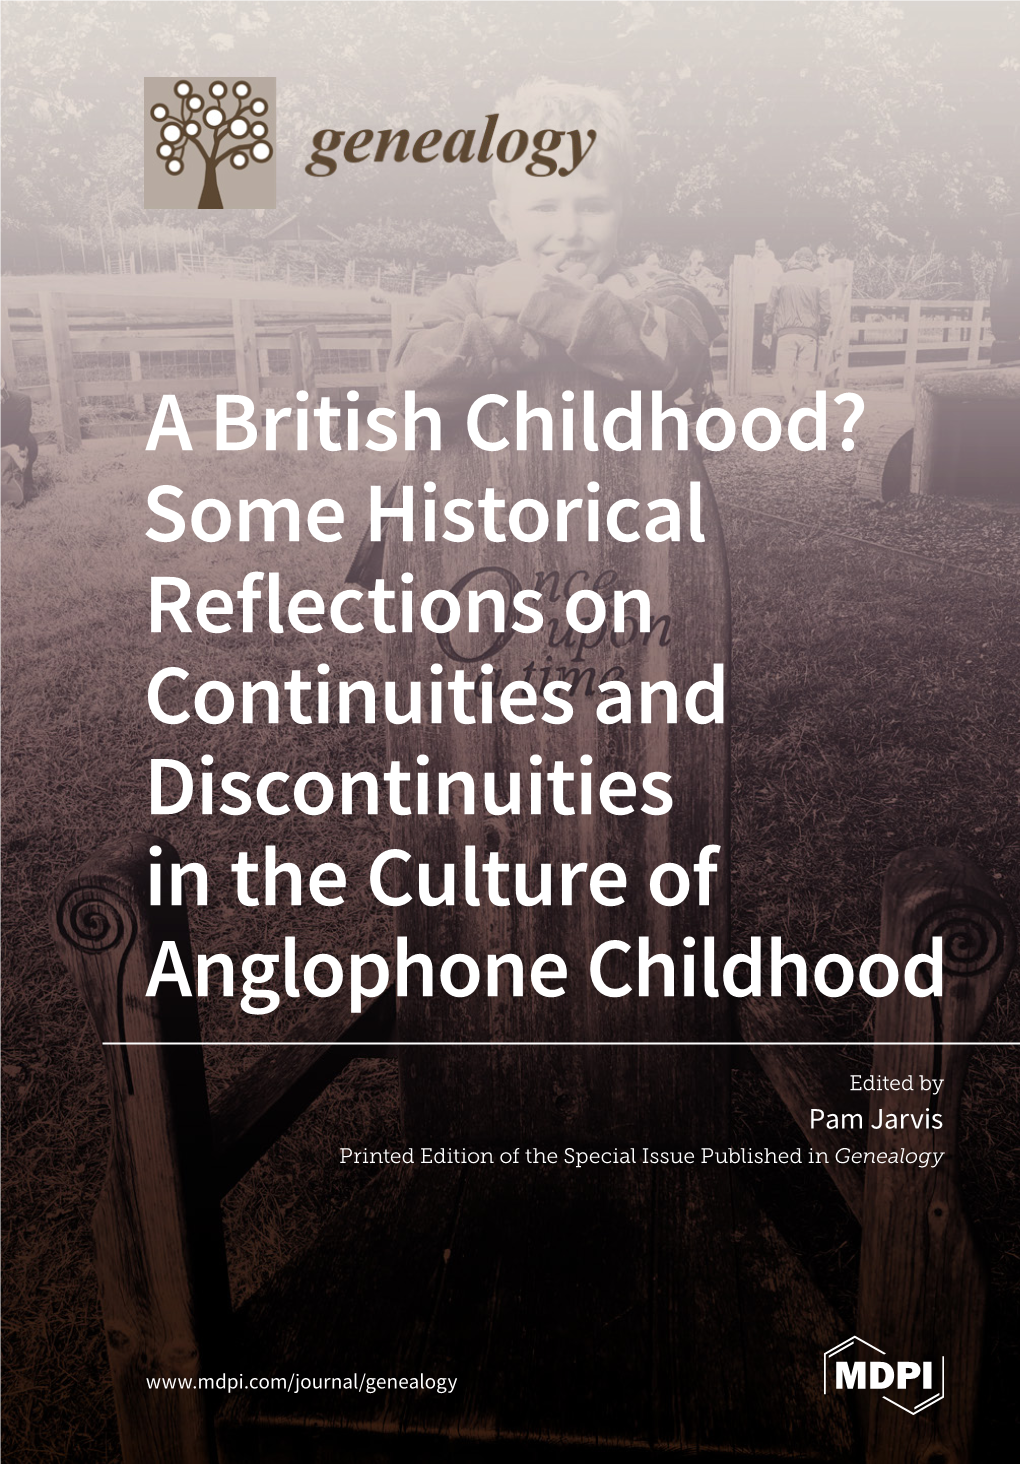 A British Childhood? Some Historical on Reflections Continuities and Discontinuities in the Culture of Anglophone Childhood